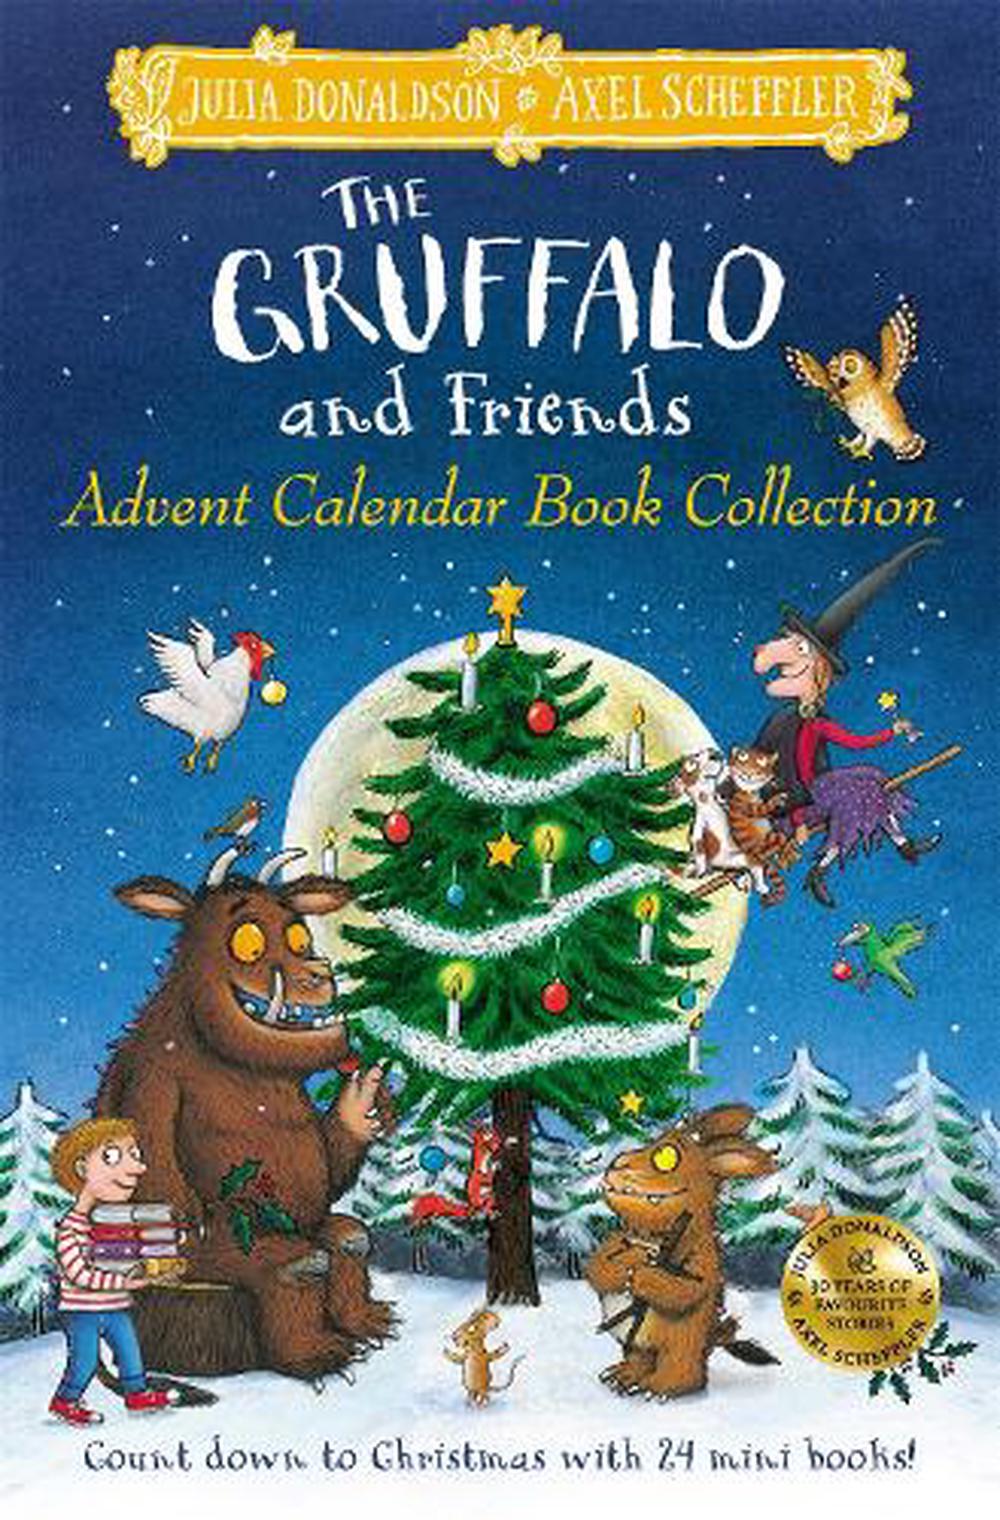 The Gruffalo and Friends Advent Calendar Book Collection by Julia